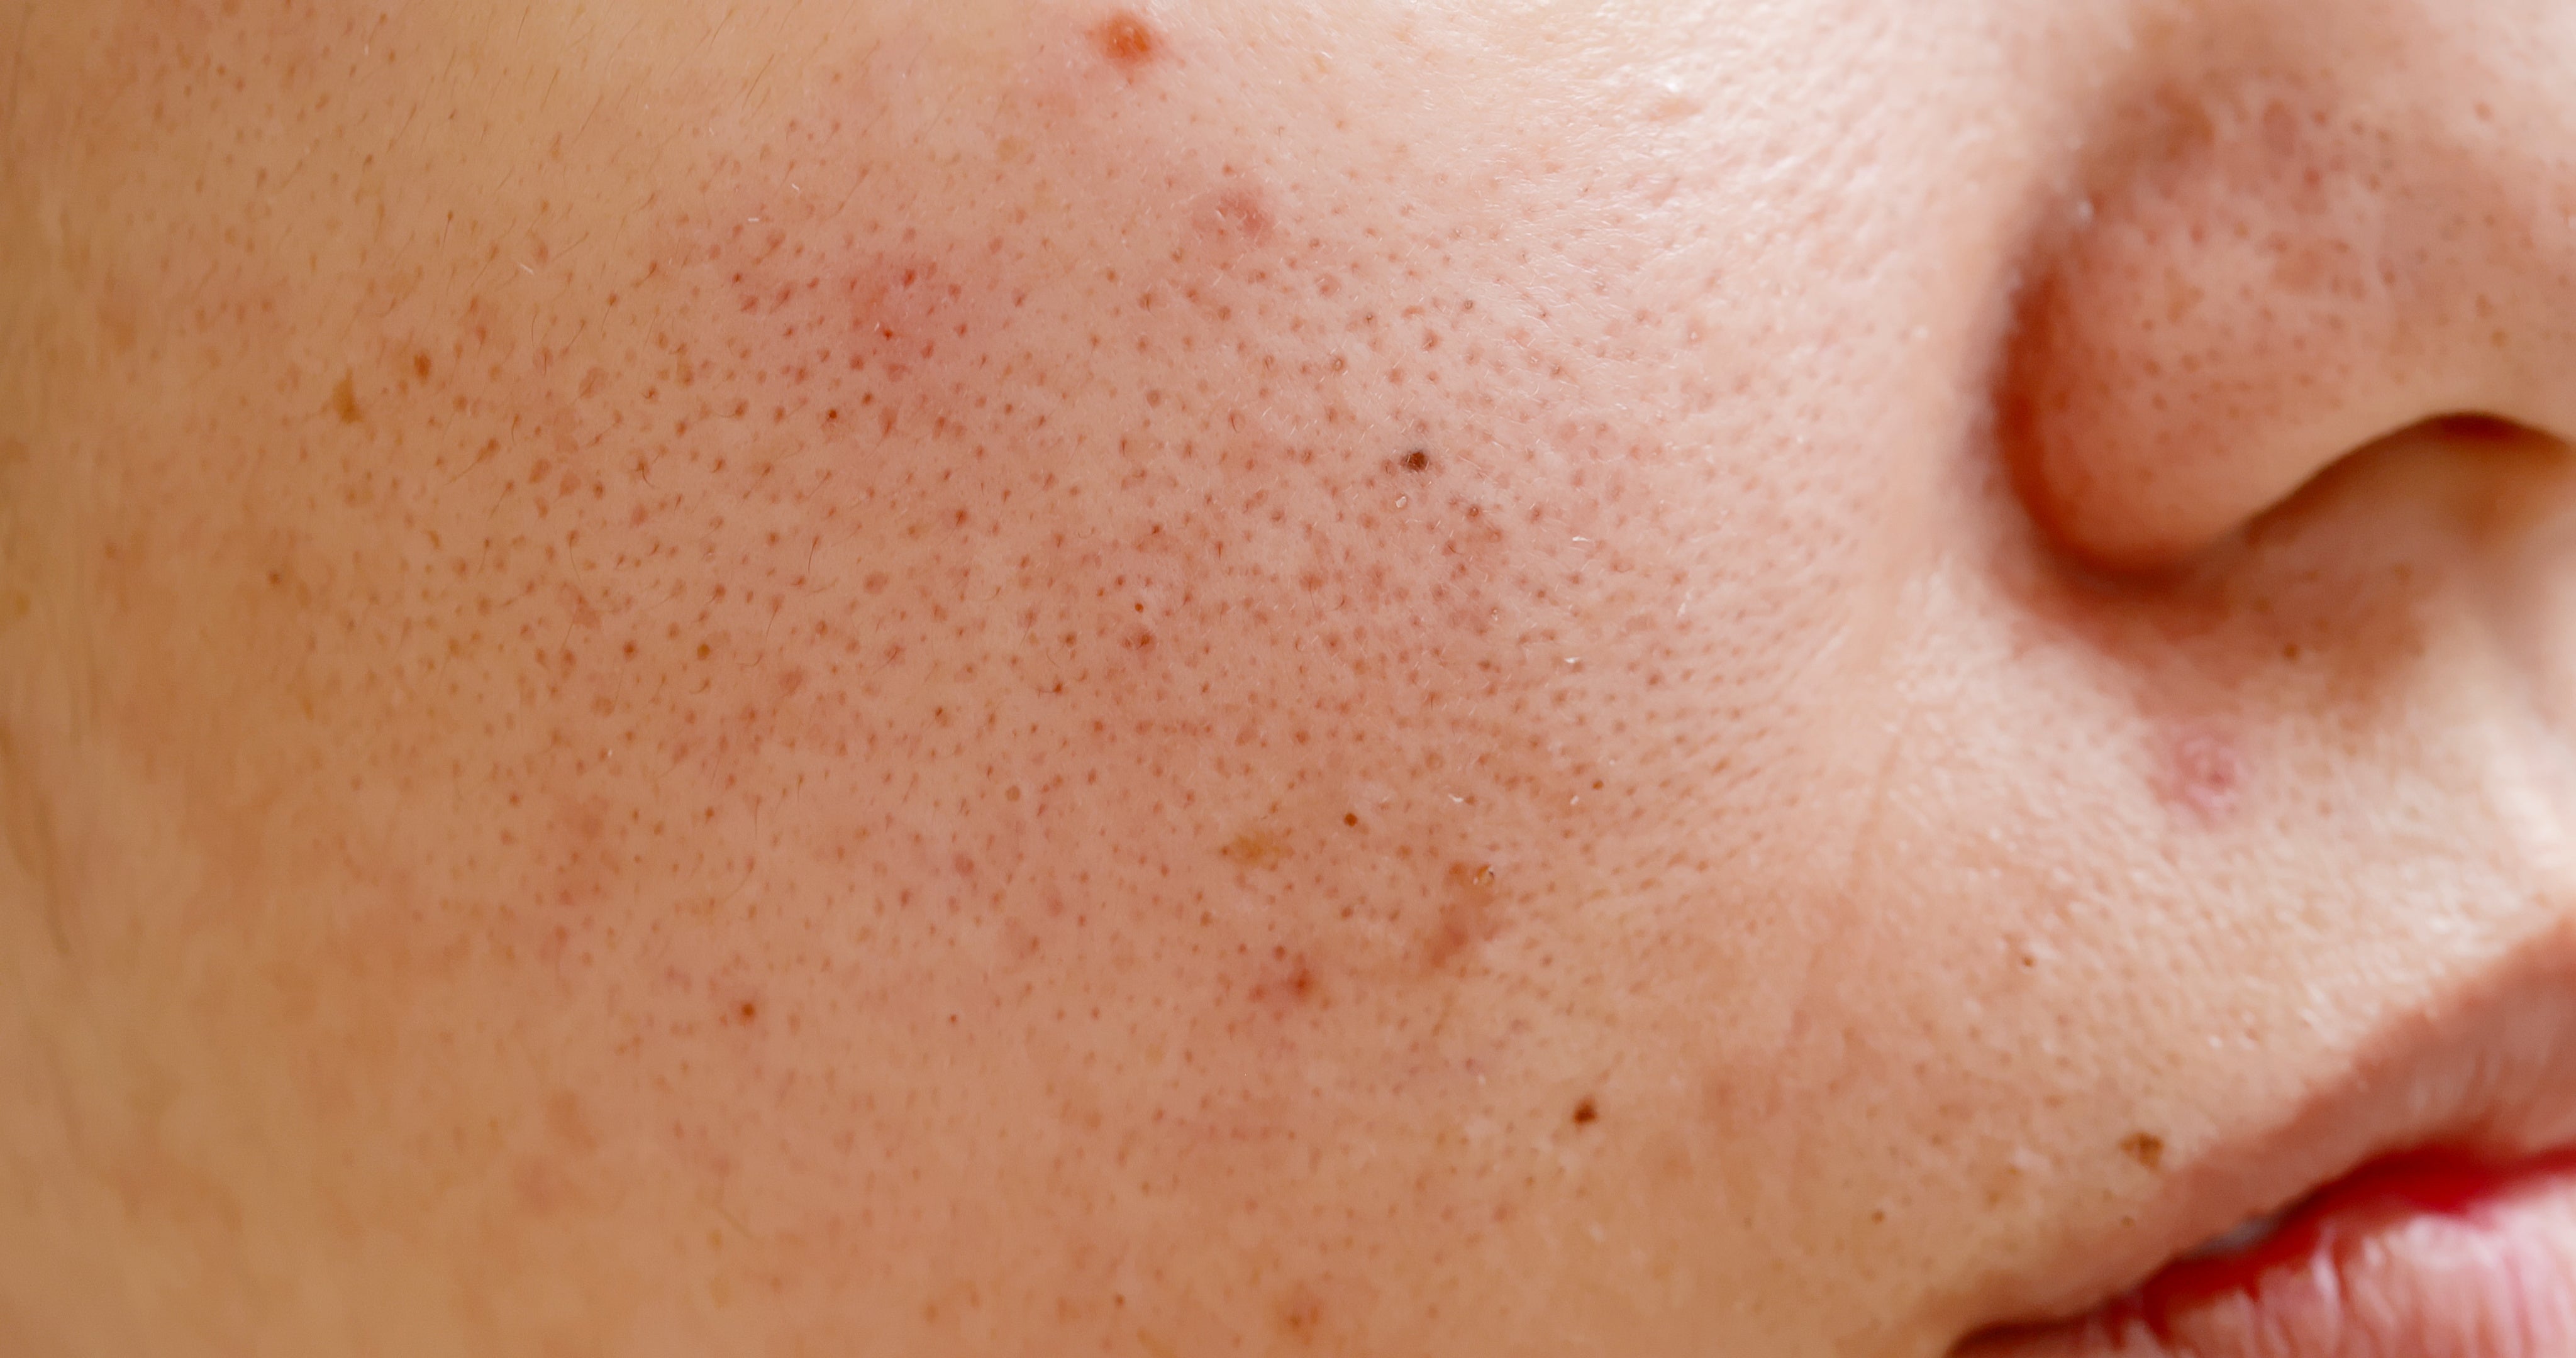 close-up of a woman's face with multiple small acne dots